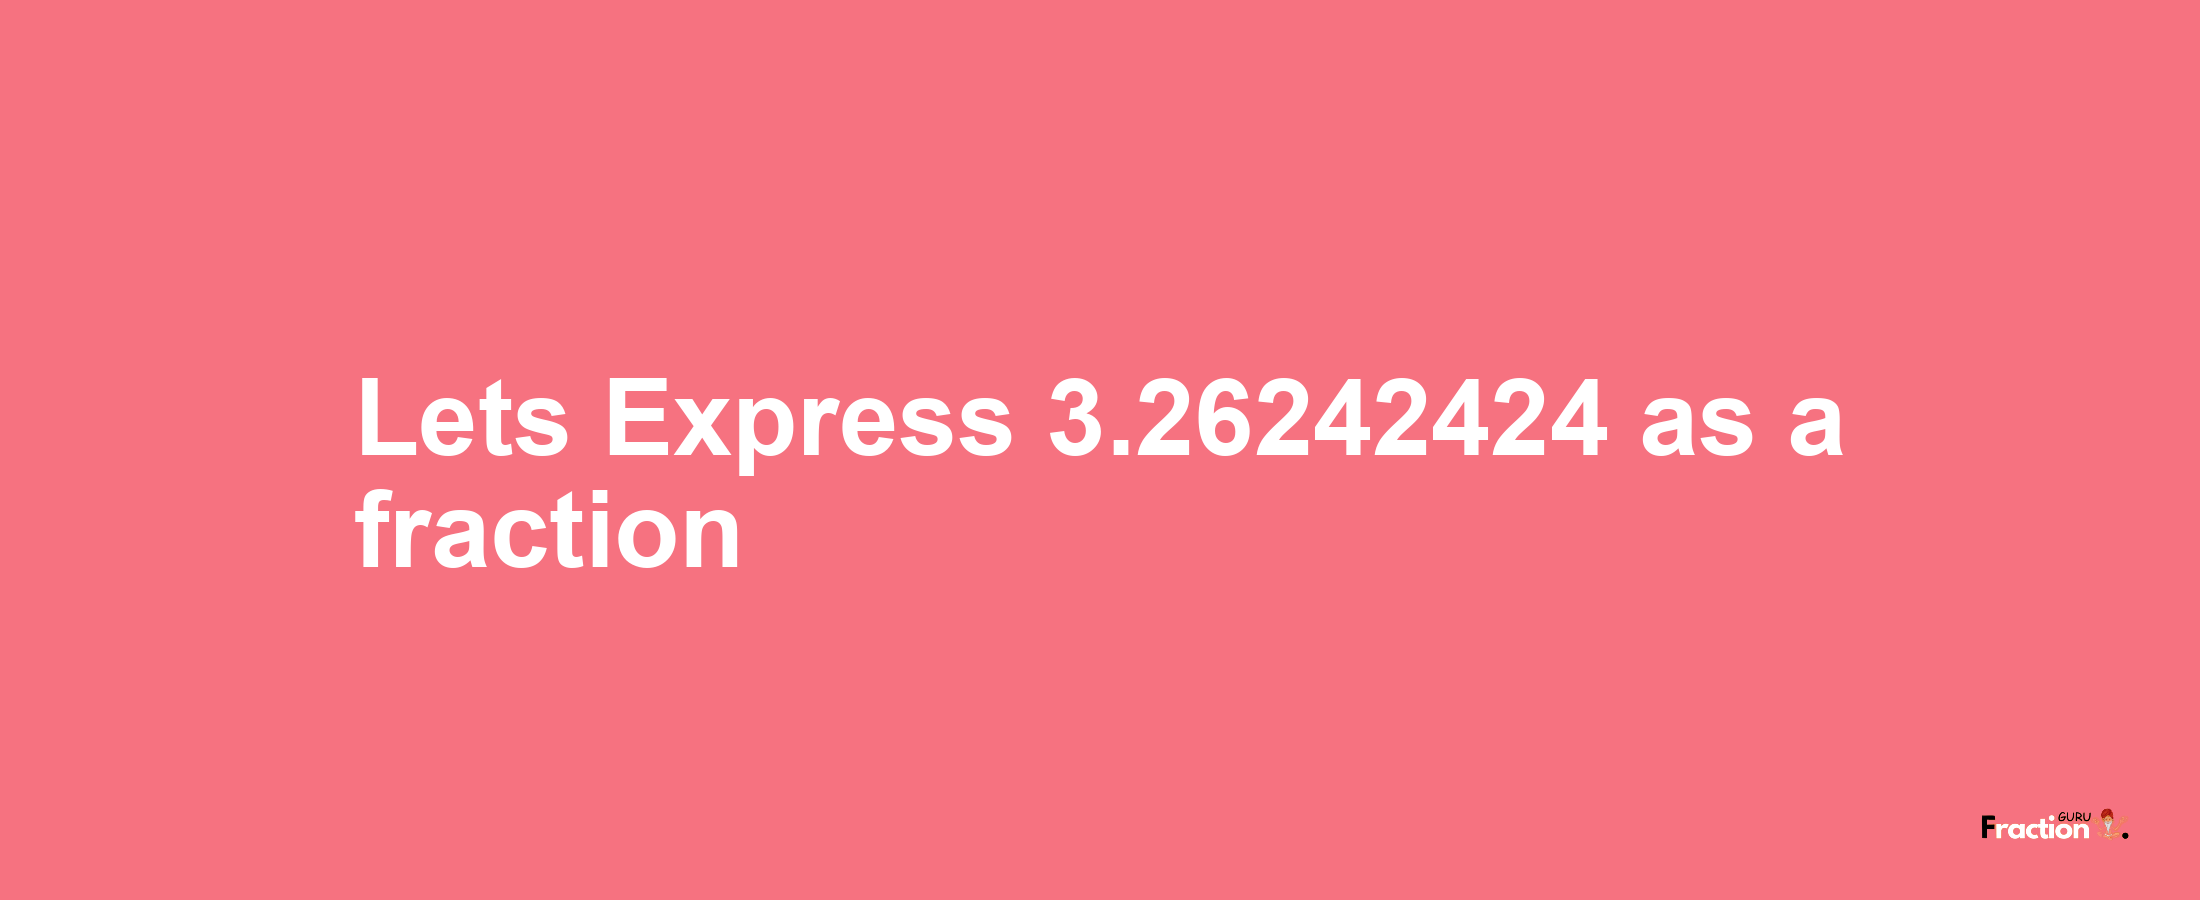 Lets Express 3.26242424 as afraction